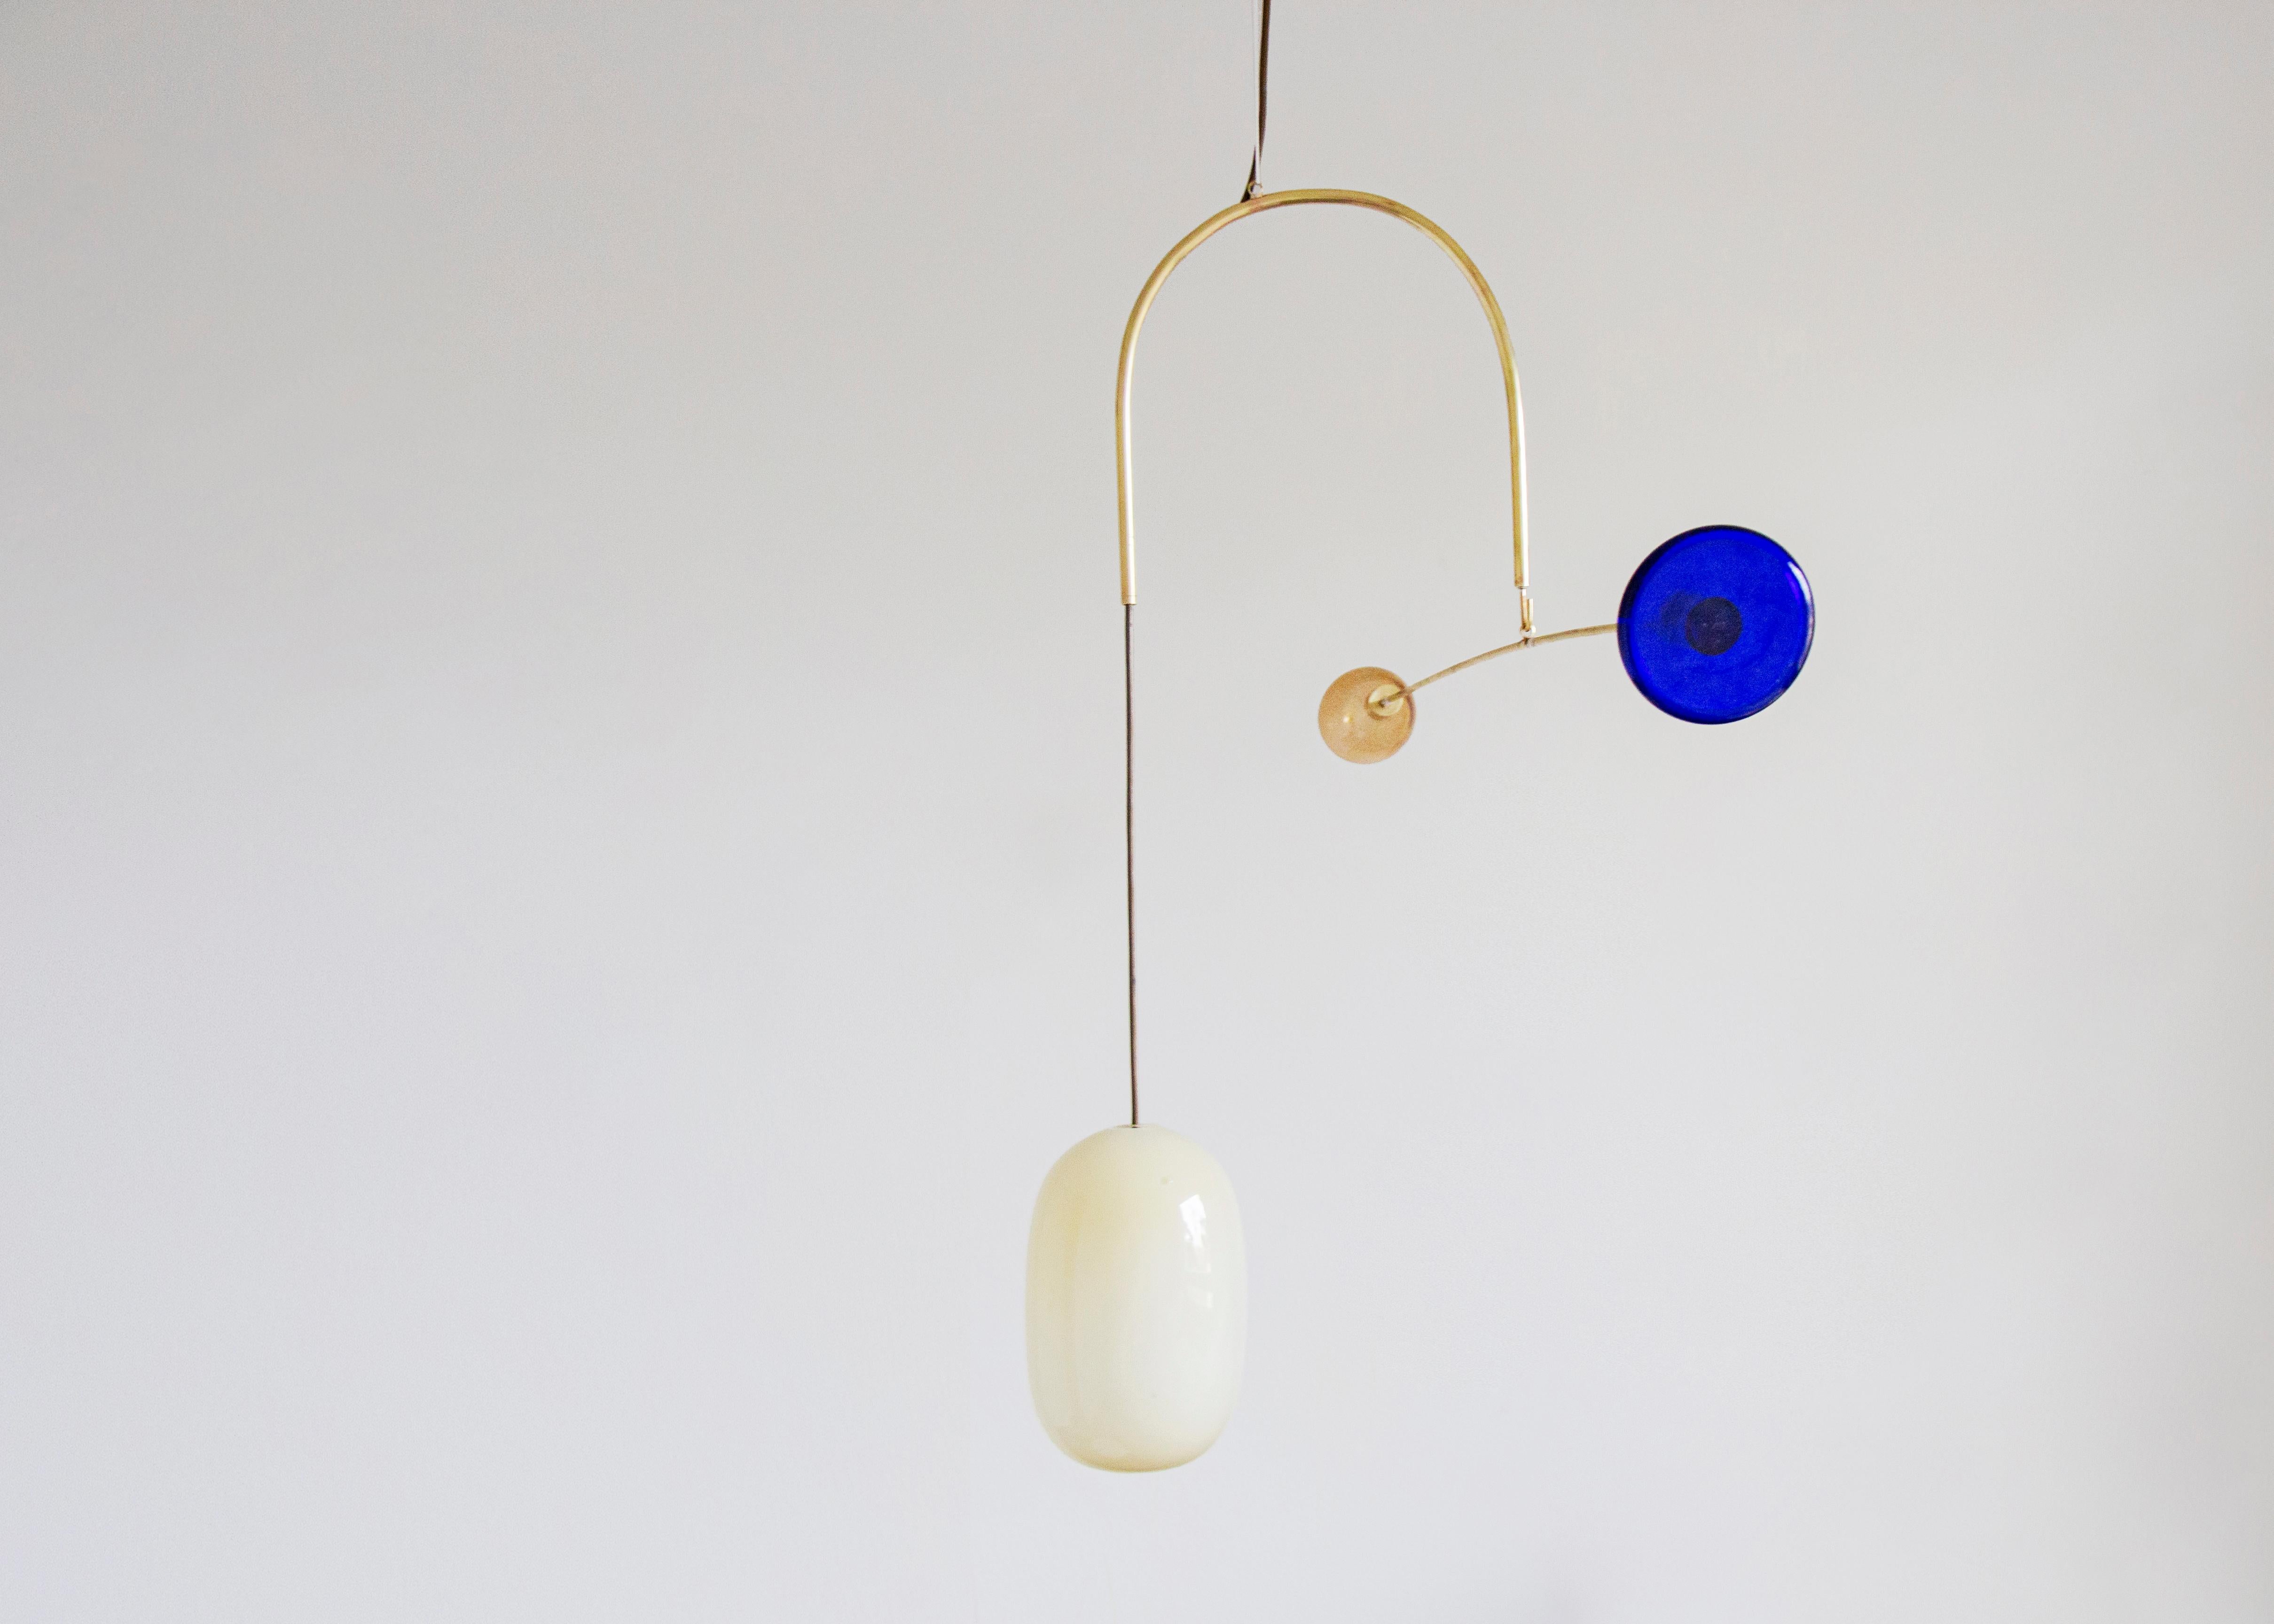 Sculptural Light No. 29 by Milla Vaahtera.
Dimensions: W 90 x H min 60 cm.
Materials: Glass, Brass.

In 2020 Milla Vaahtera started a series of unique sculptural lights made out of brass and hand blown glass.
